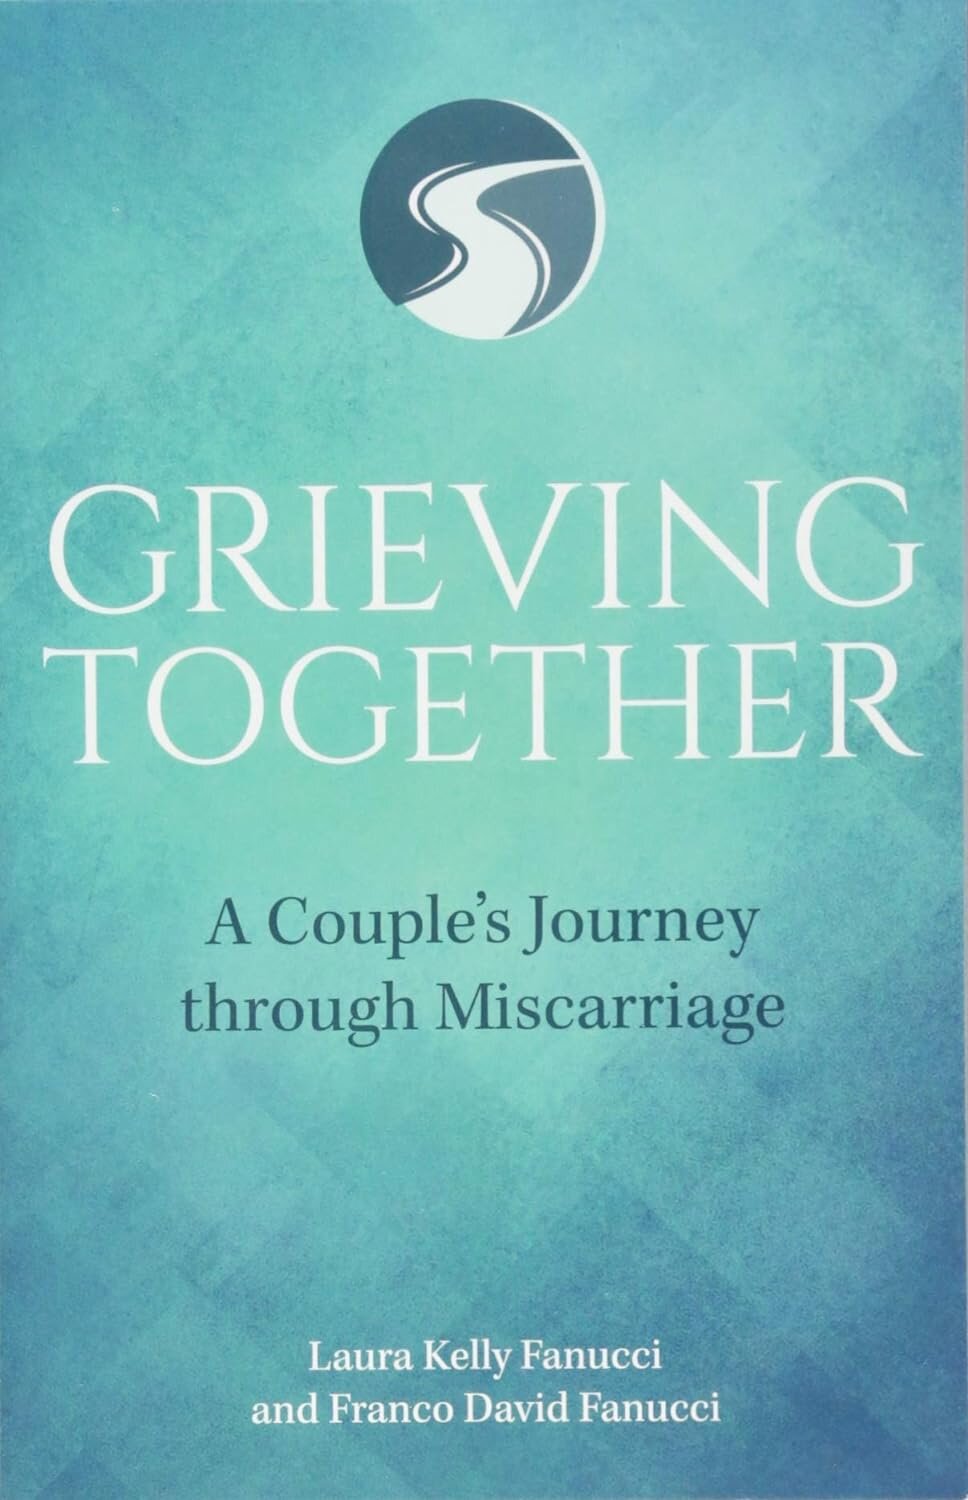 Grieving Together: A Couple’s Journey through Miscarriage